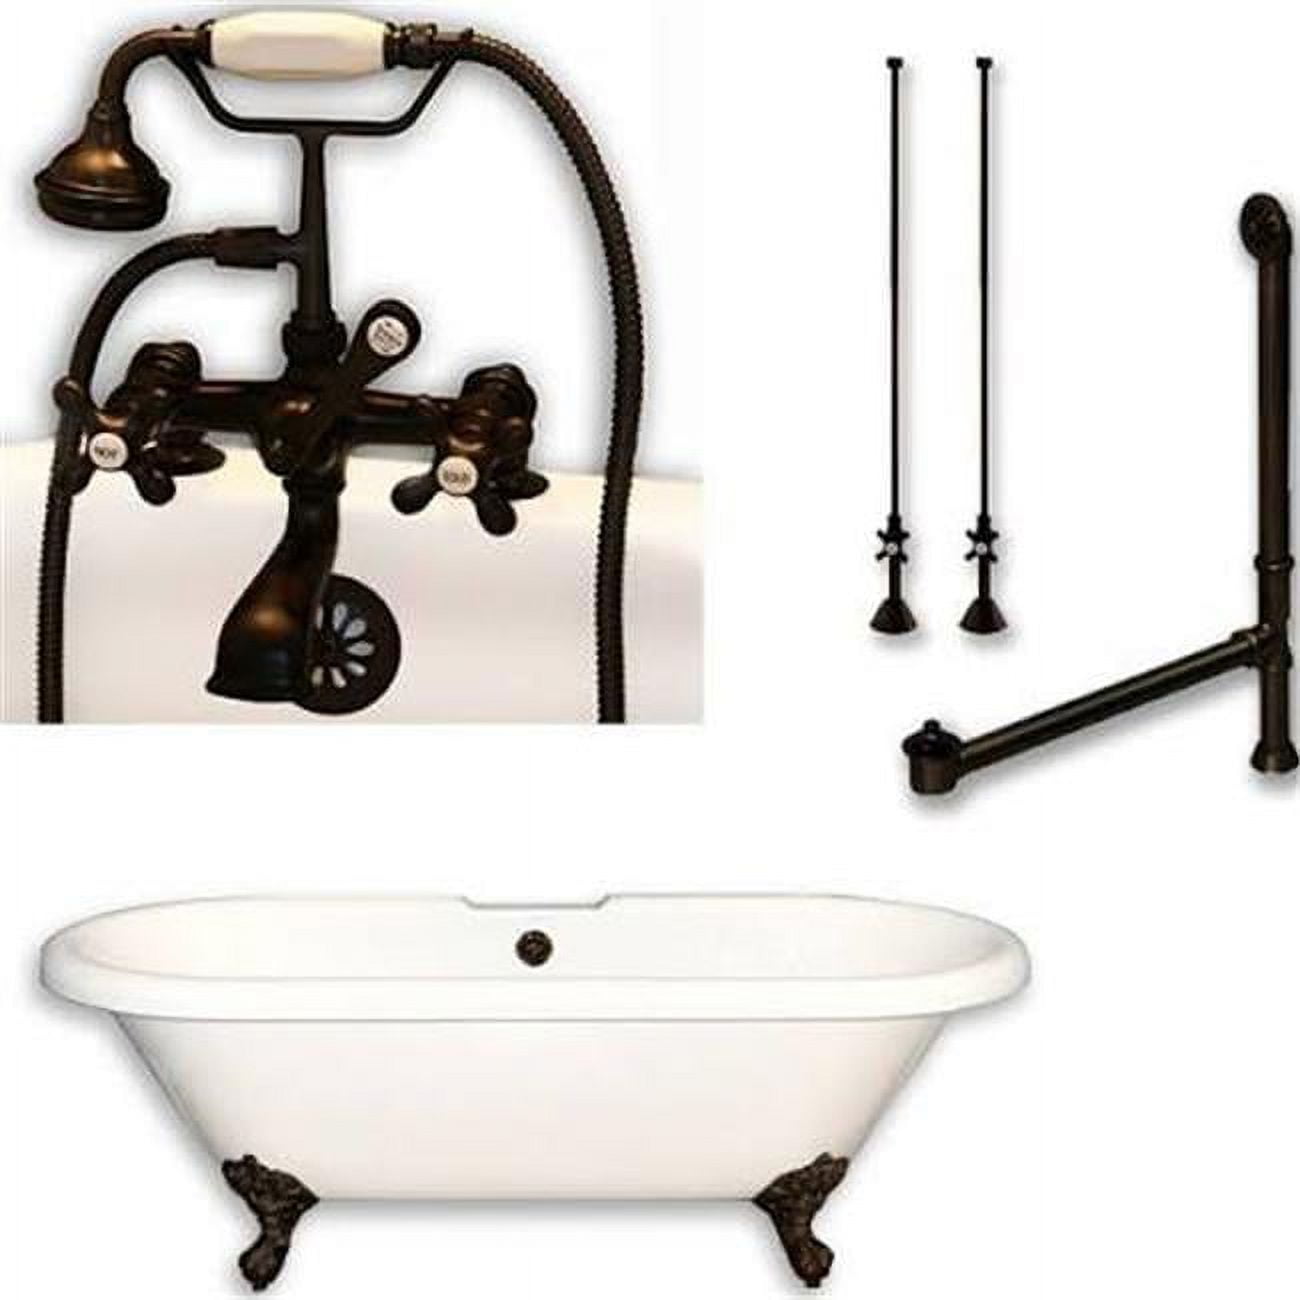 Ade-463d-2-pkg-orb-7dh 70 X 30 In. Acrylic Double Ended Clawfoot Bathtub With Faucet Drillings & Chrome Plumbing